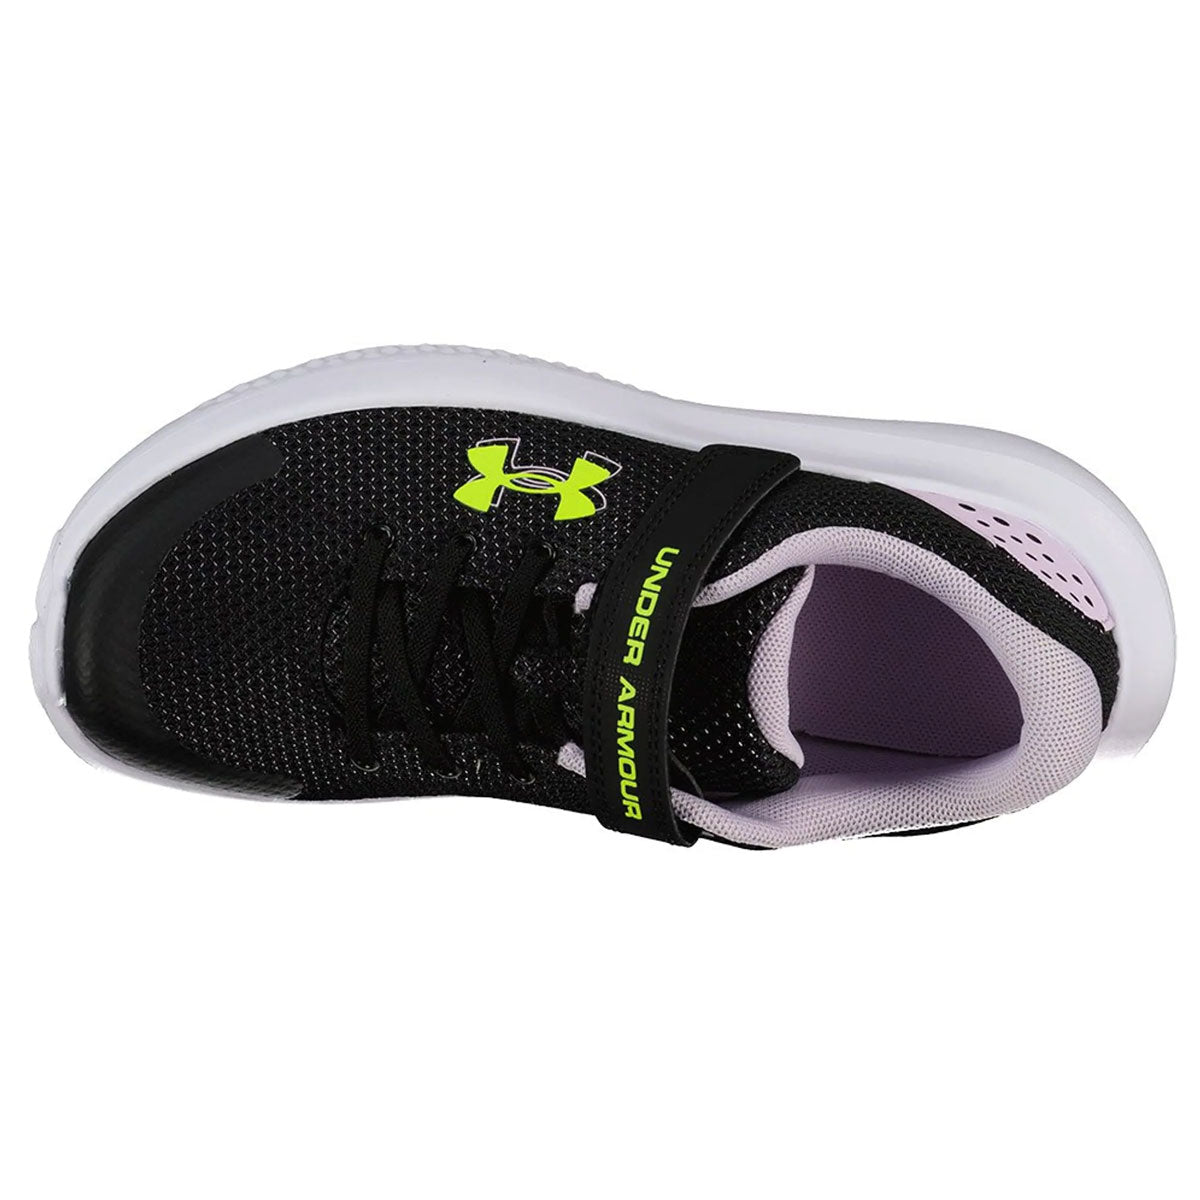 Under Armour GPS Surge 4 AC Running Shoes - Girls - Black/Purple Ace/High Vis Yellow